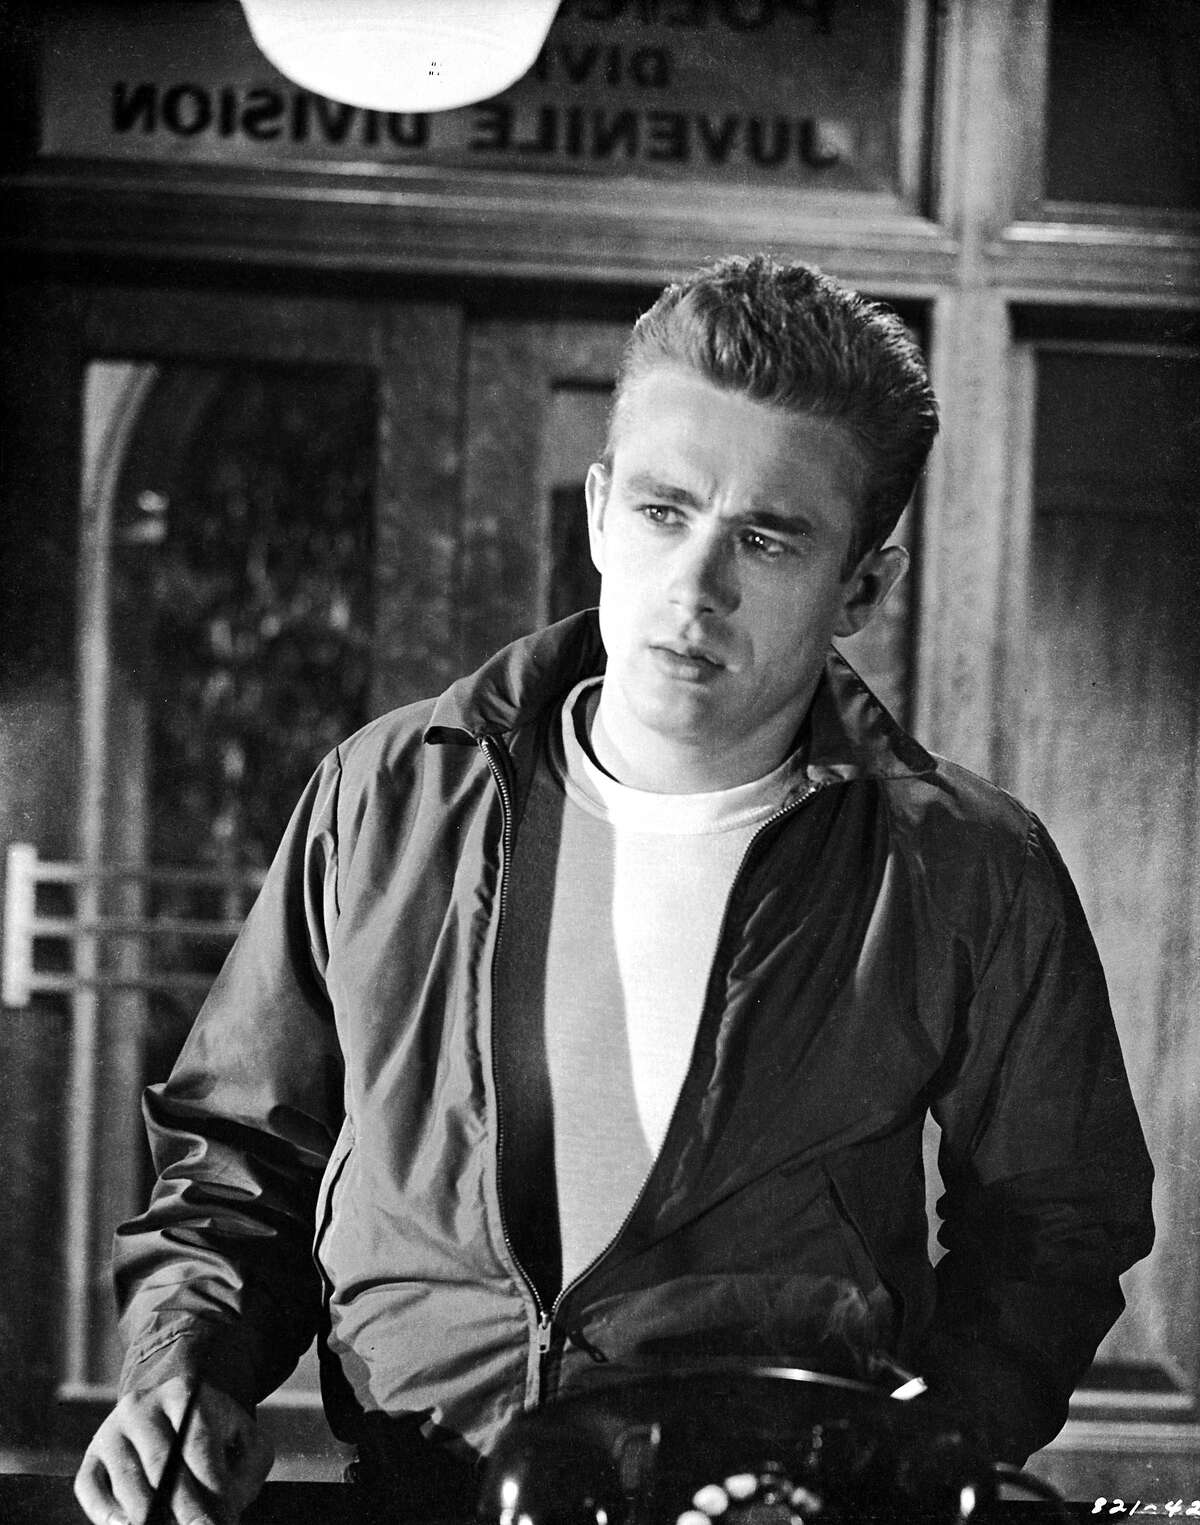 60 years after James Dean's death, 'cursed' car mystery continues